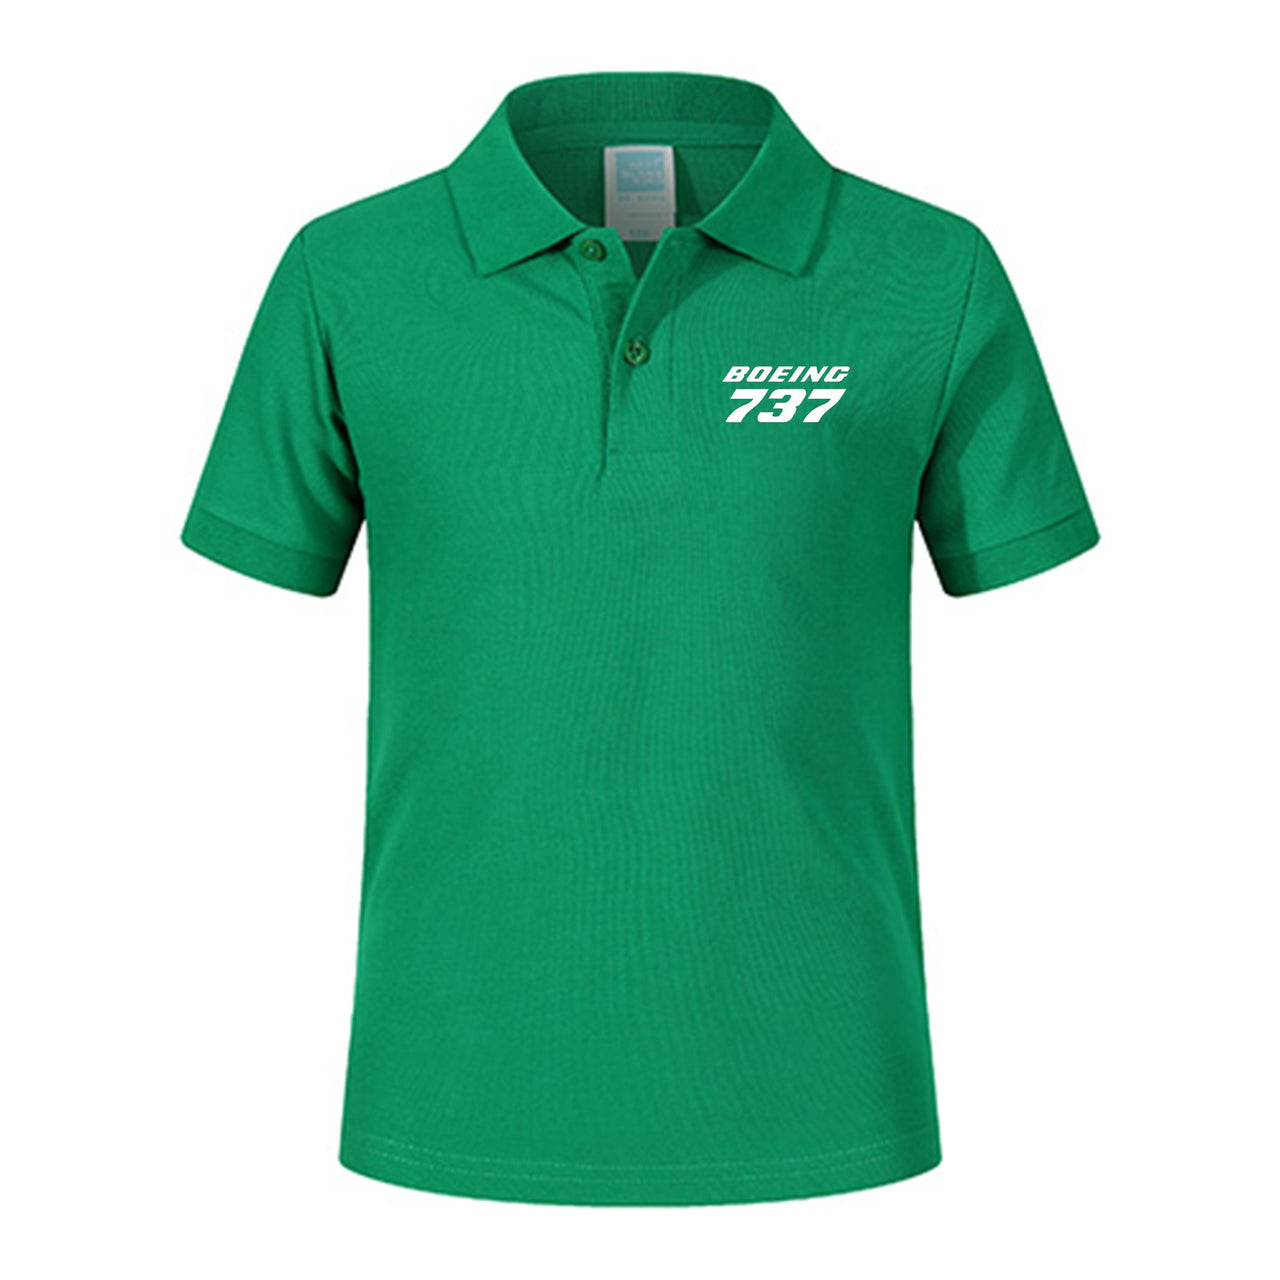 Boeing 737 & Text Designed Children Polo T-Shirts